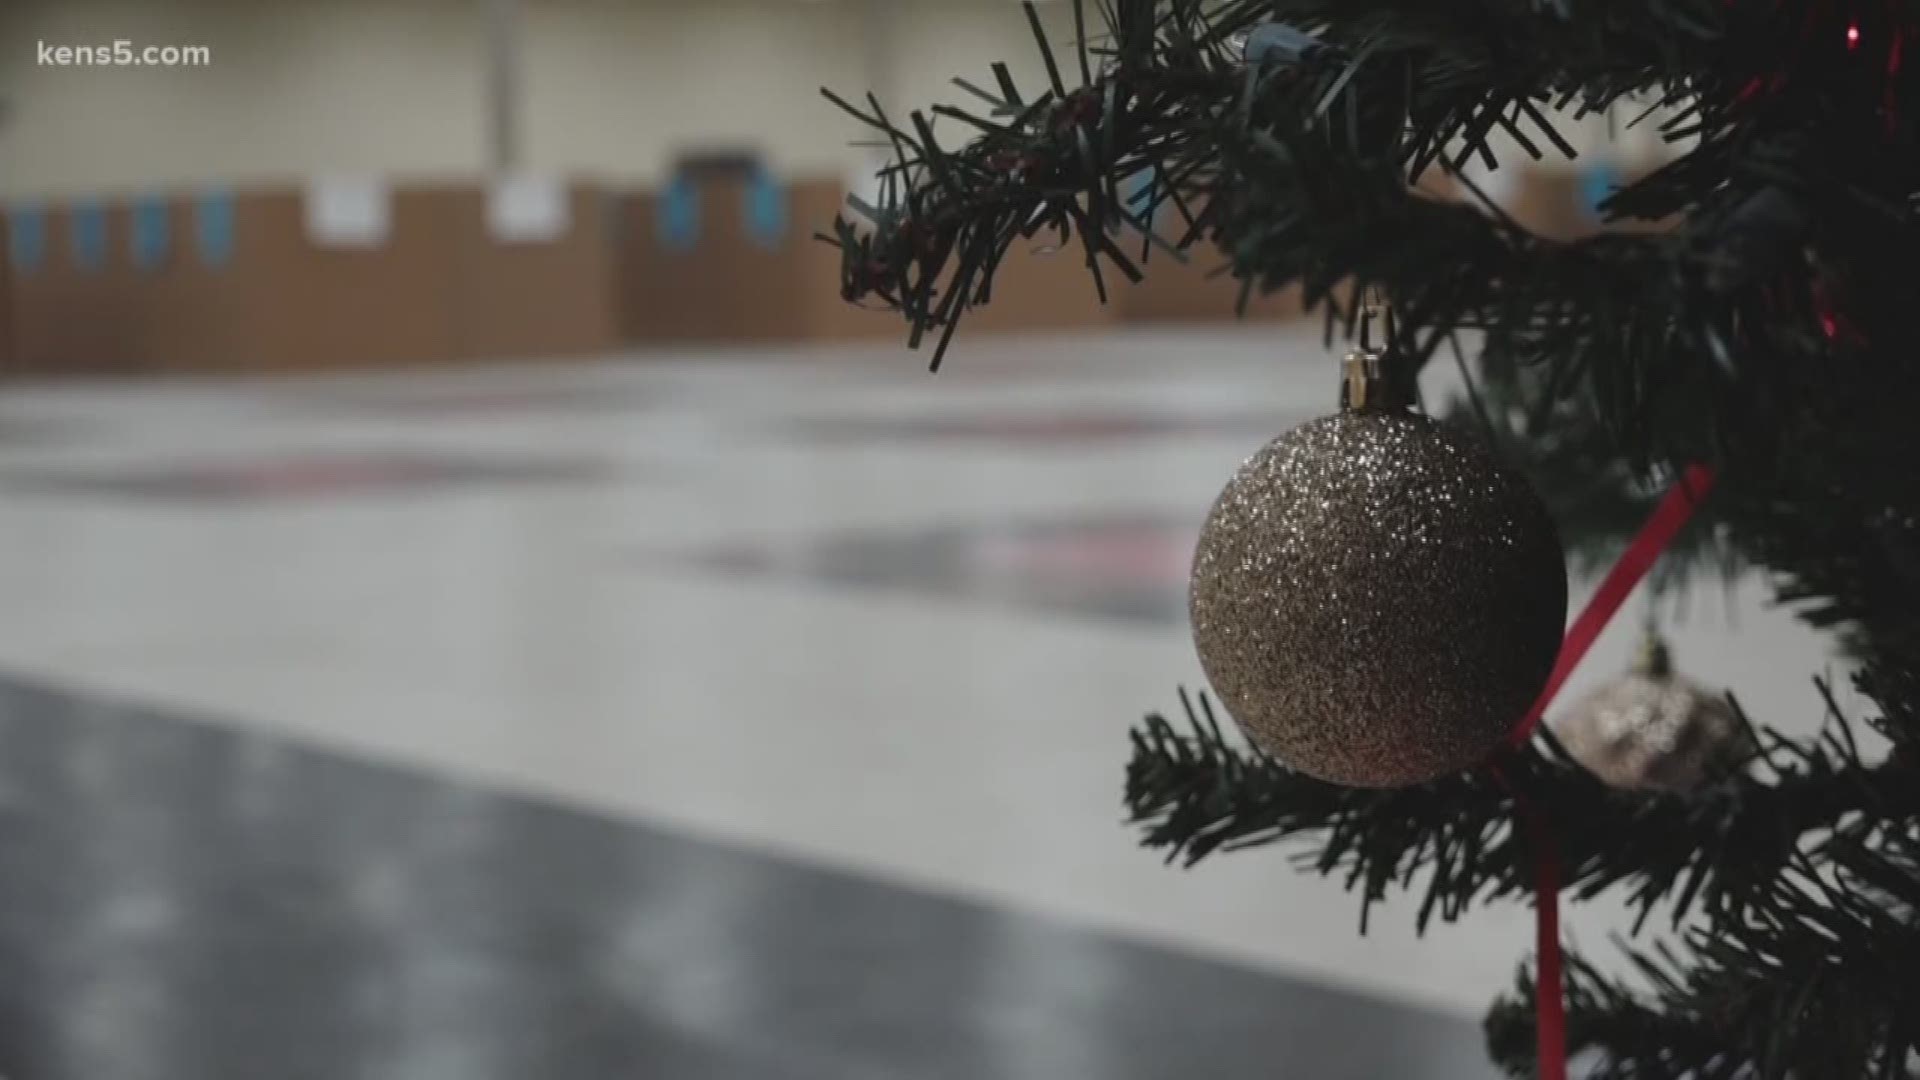 The Salvation Army's Angel Tree program has a goal of helping 8,000 children. So far, they're falling short. But there's a way you can help.